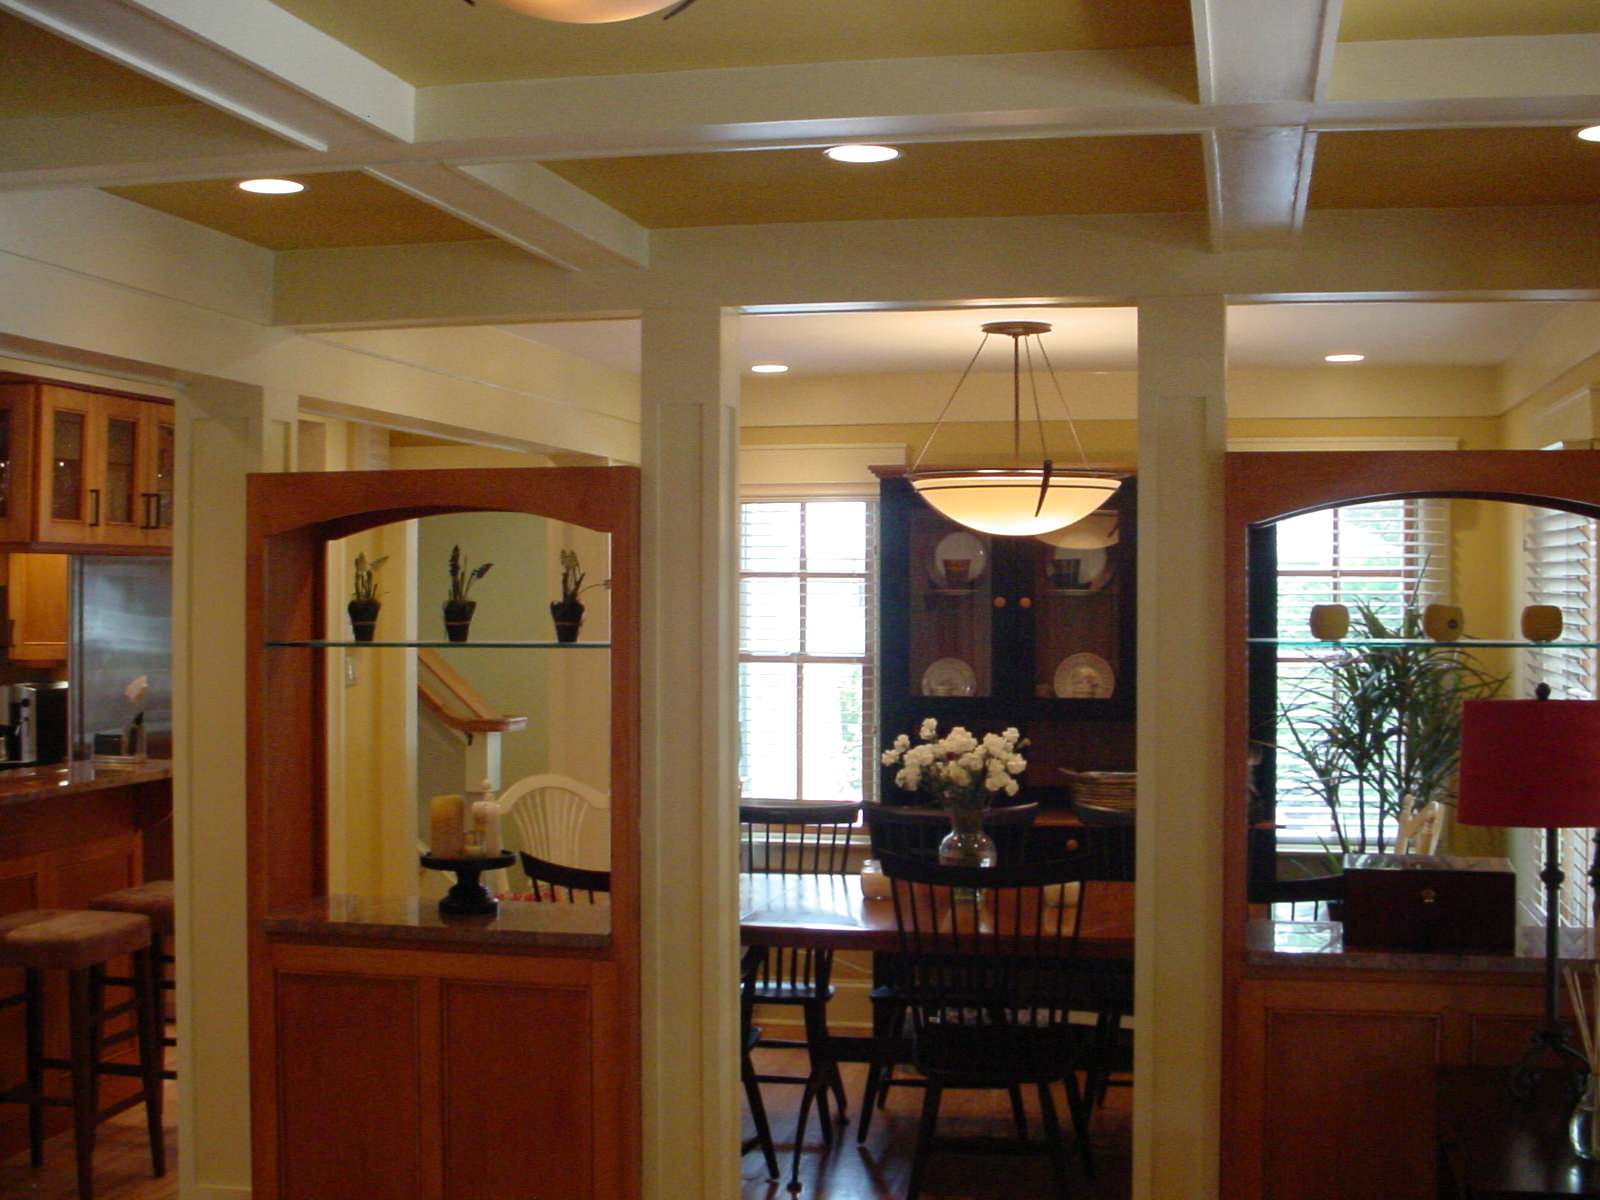 Coffering, open Cabinets and period lighting detail the interior